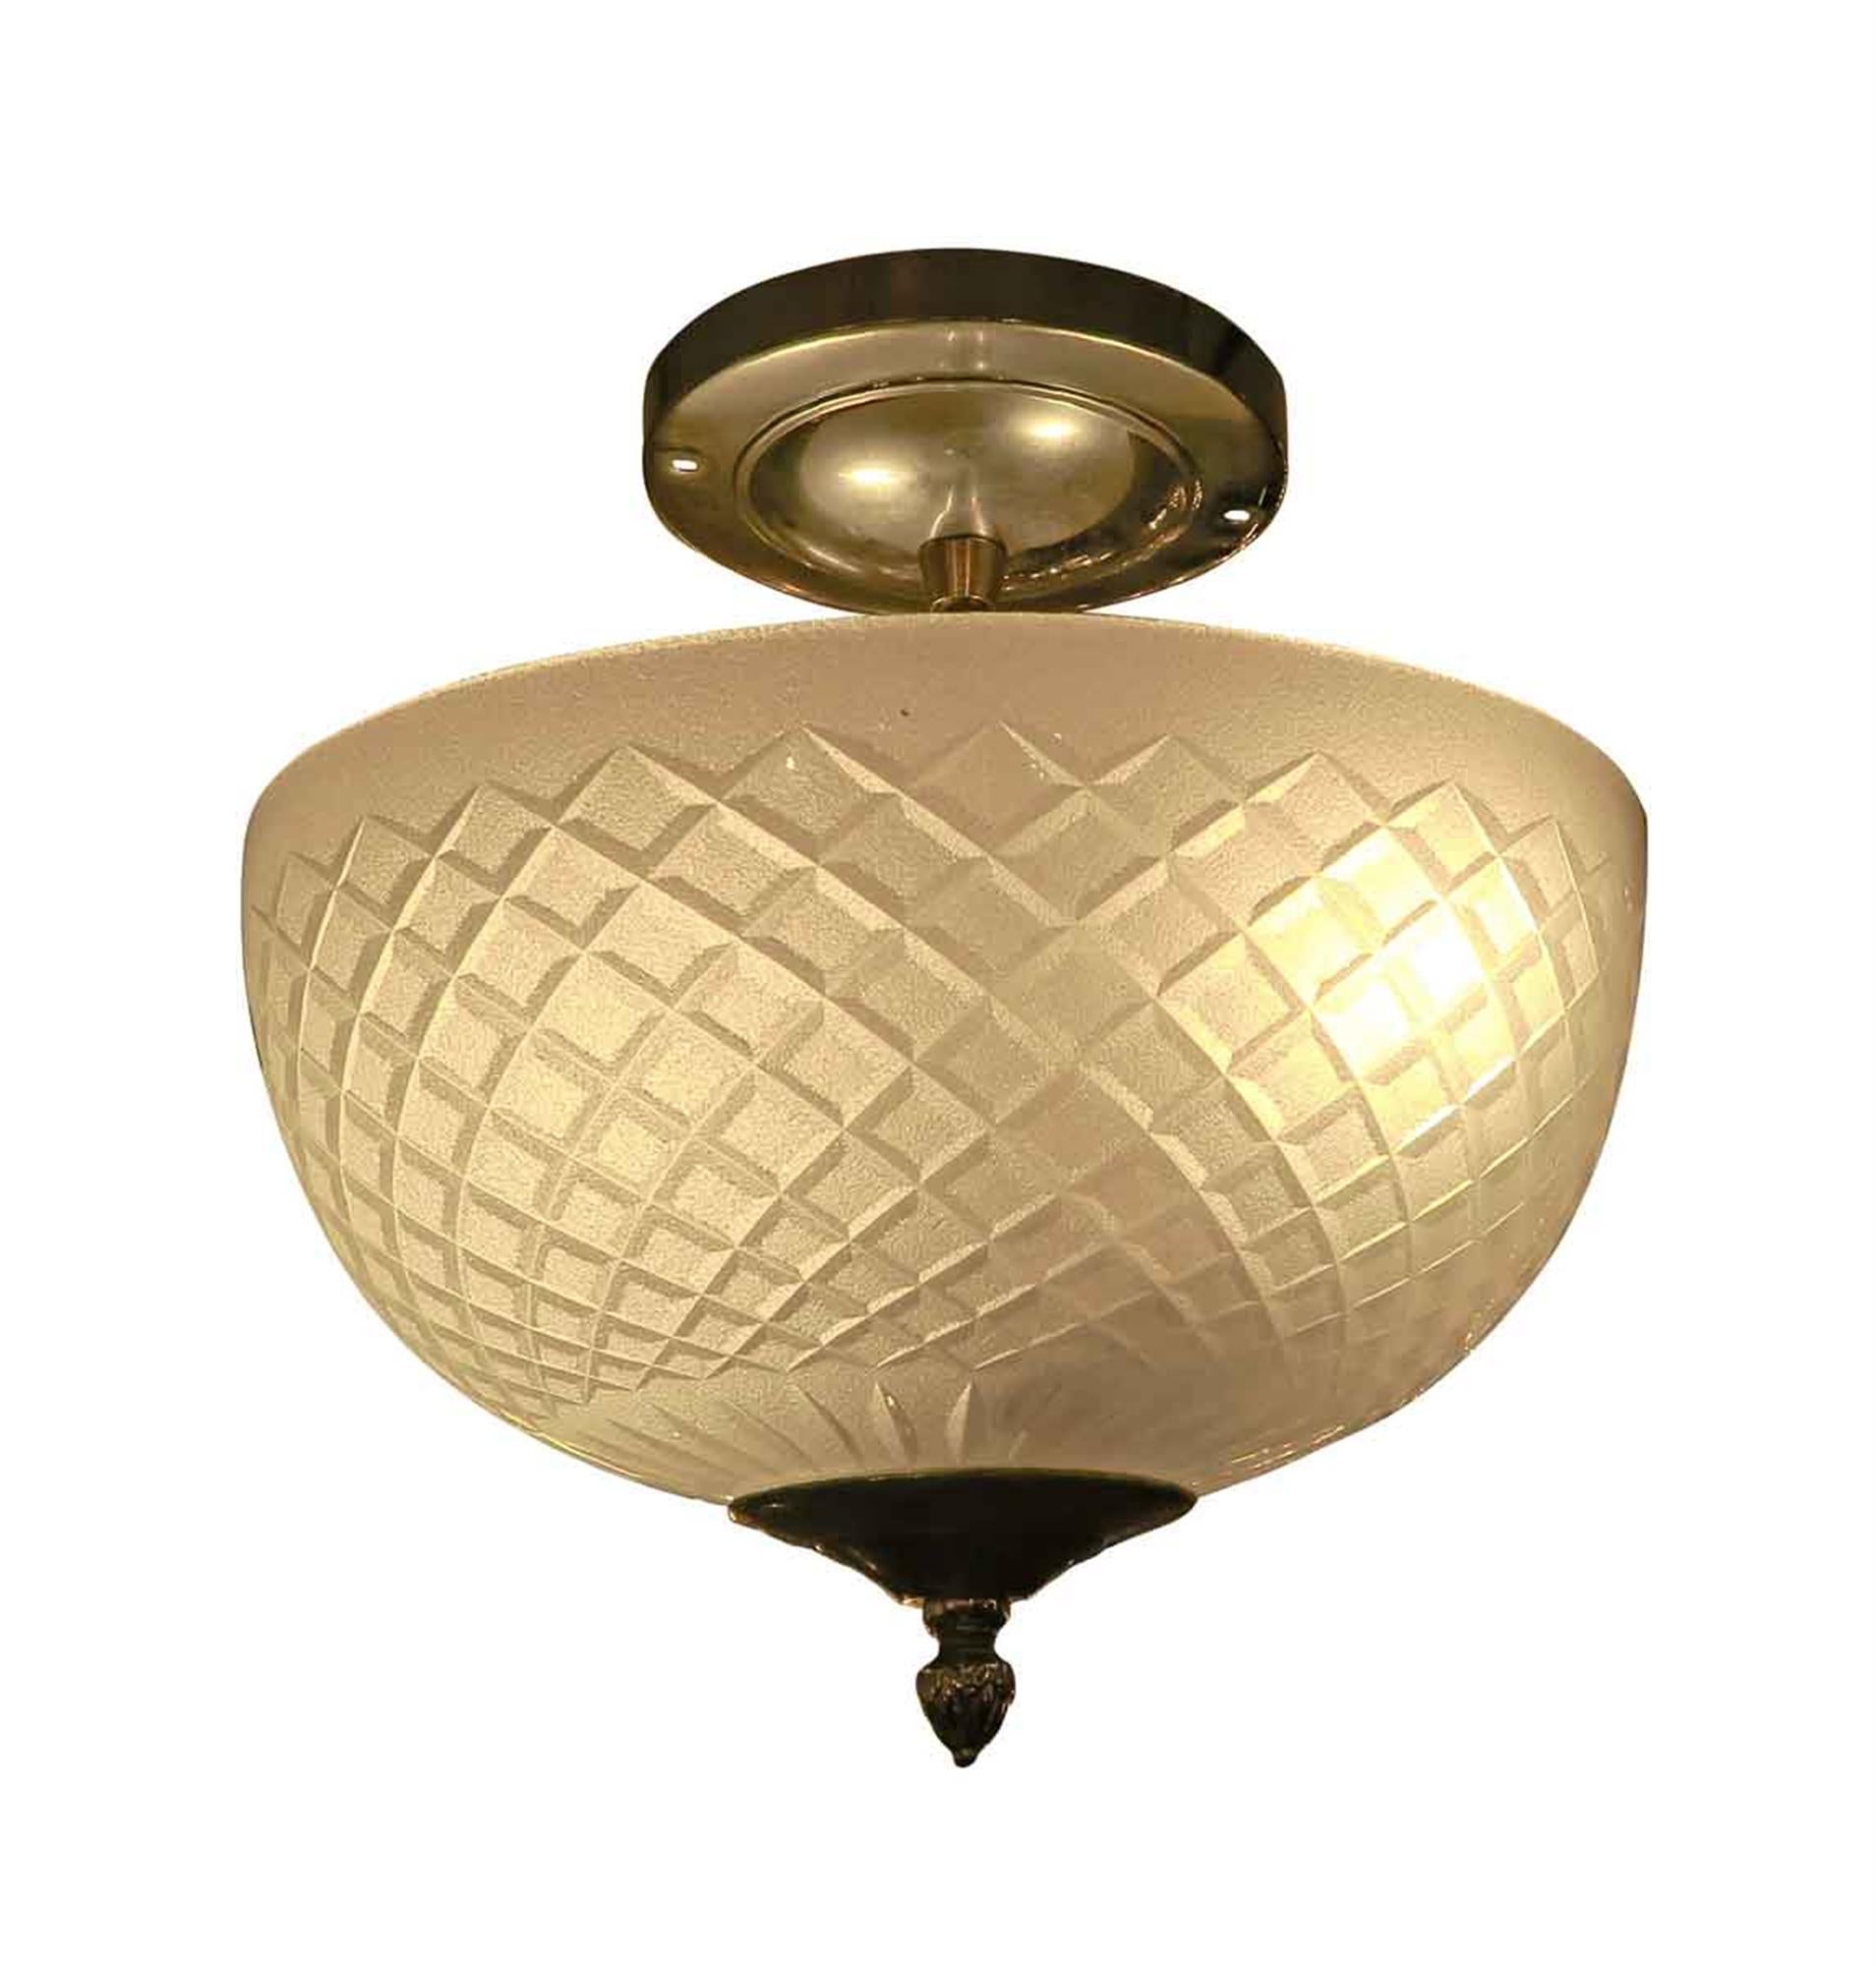 Cut crystal semi flush mount frosted light fixture with a nickel plated brass base. From the 20th century, these lights adorned various corridors of the towers of the the NYC Waldorf Astoria Hotel. Waldorf Astoria authenticity card included with